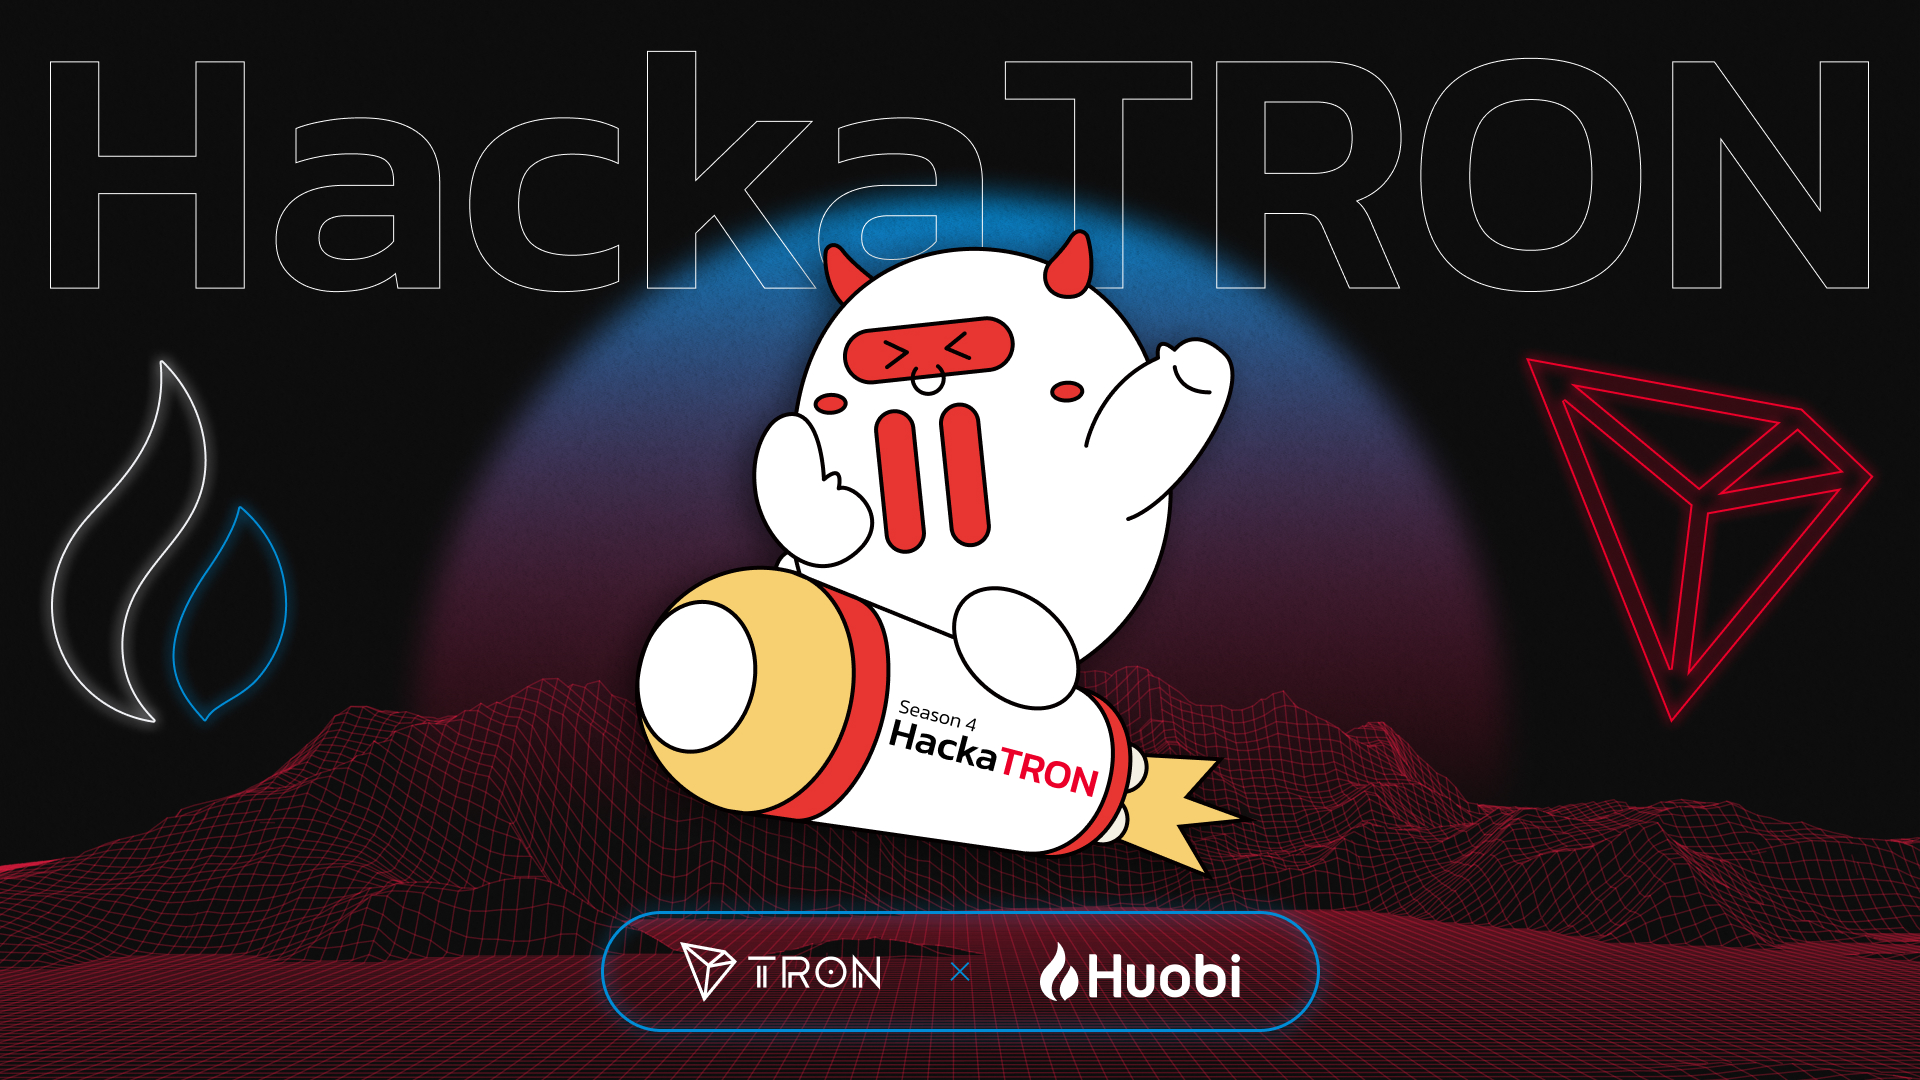 Submission Period for Season 4 of the HackaTRON Comes to an End